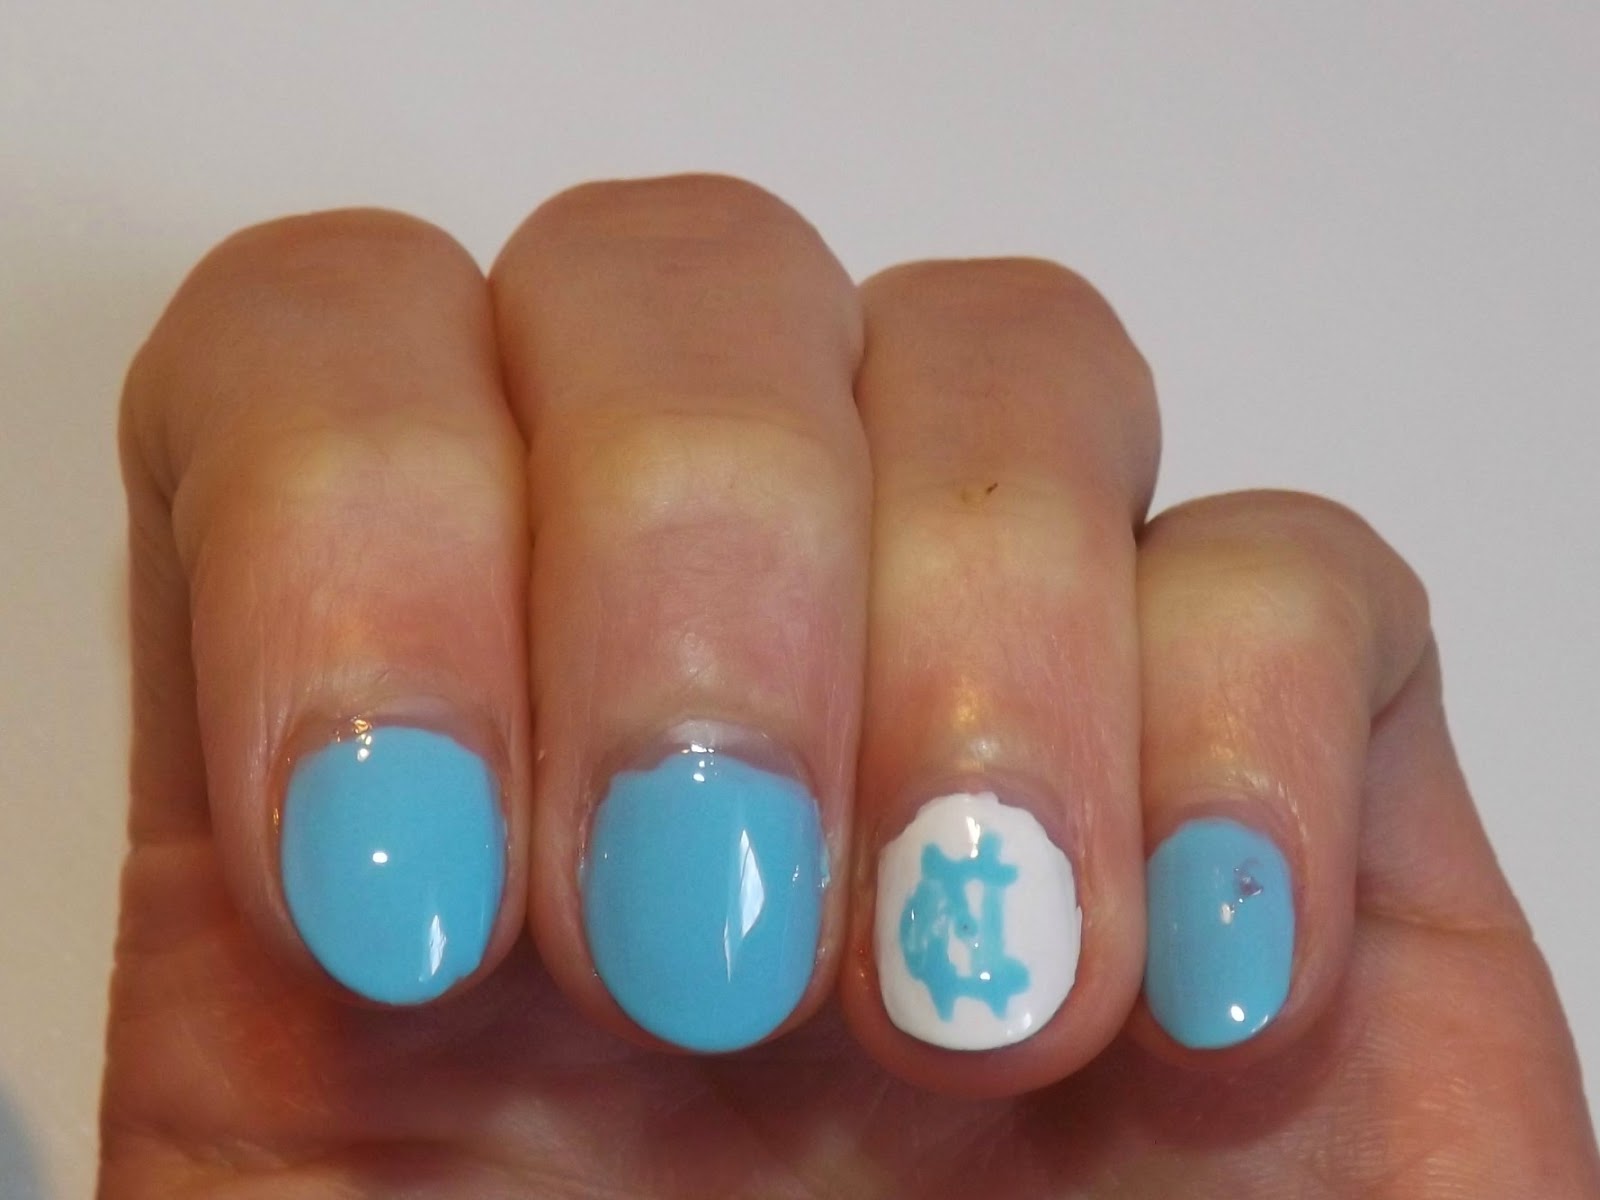 7. March Madness Nail Art Designs - wide 5